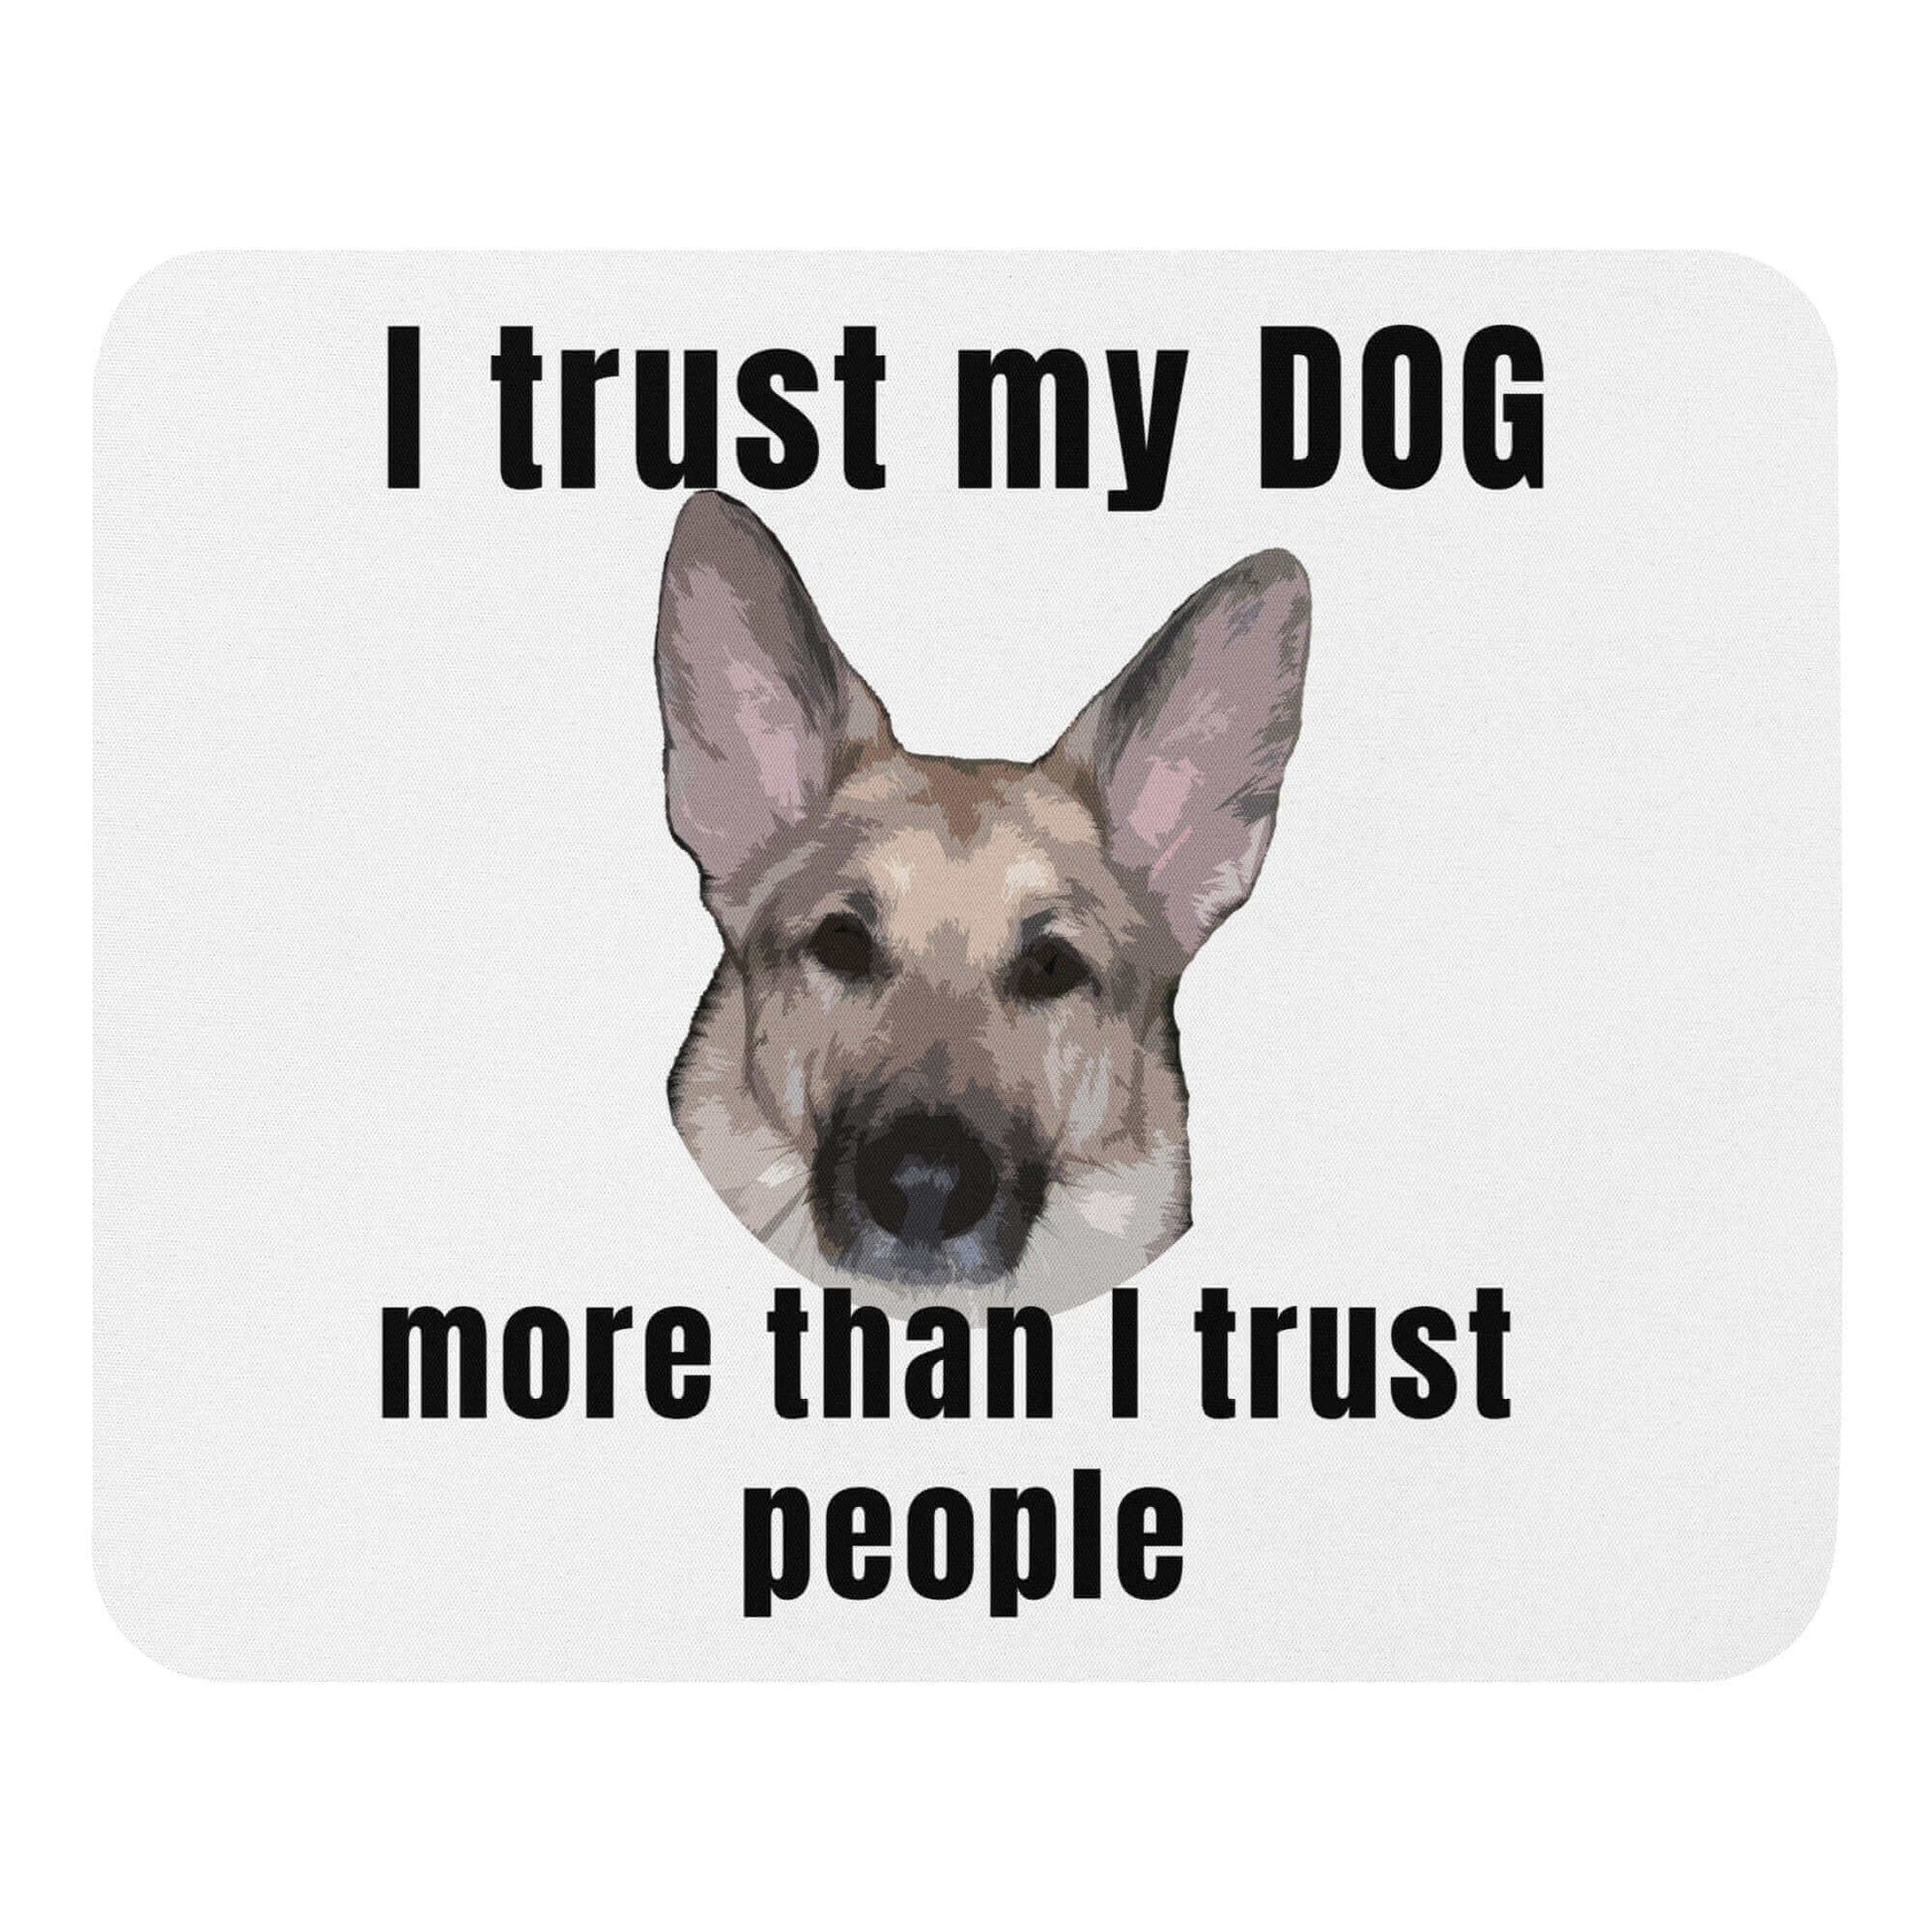 I trust my DOG more than I trust people - Mouse pad Custom Mouse Pad DOG German Shepherd GSD IT Mouse Pad Peopling Trust